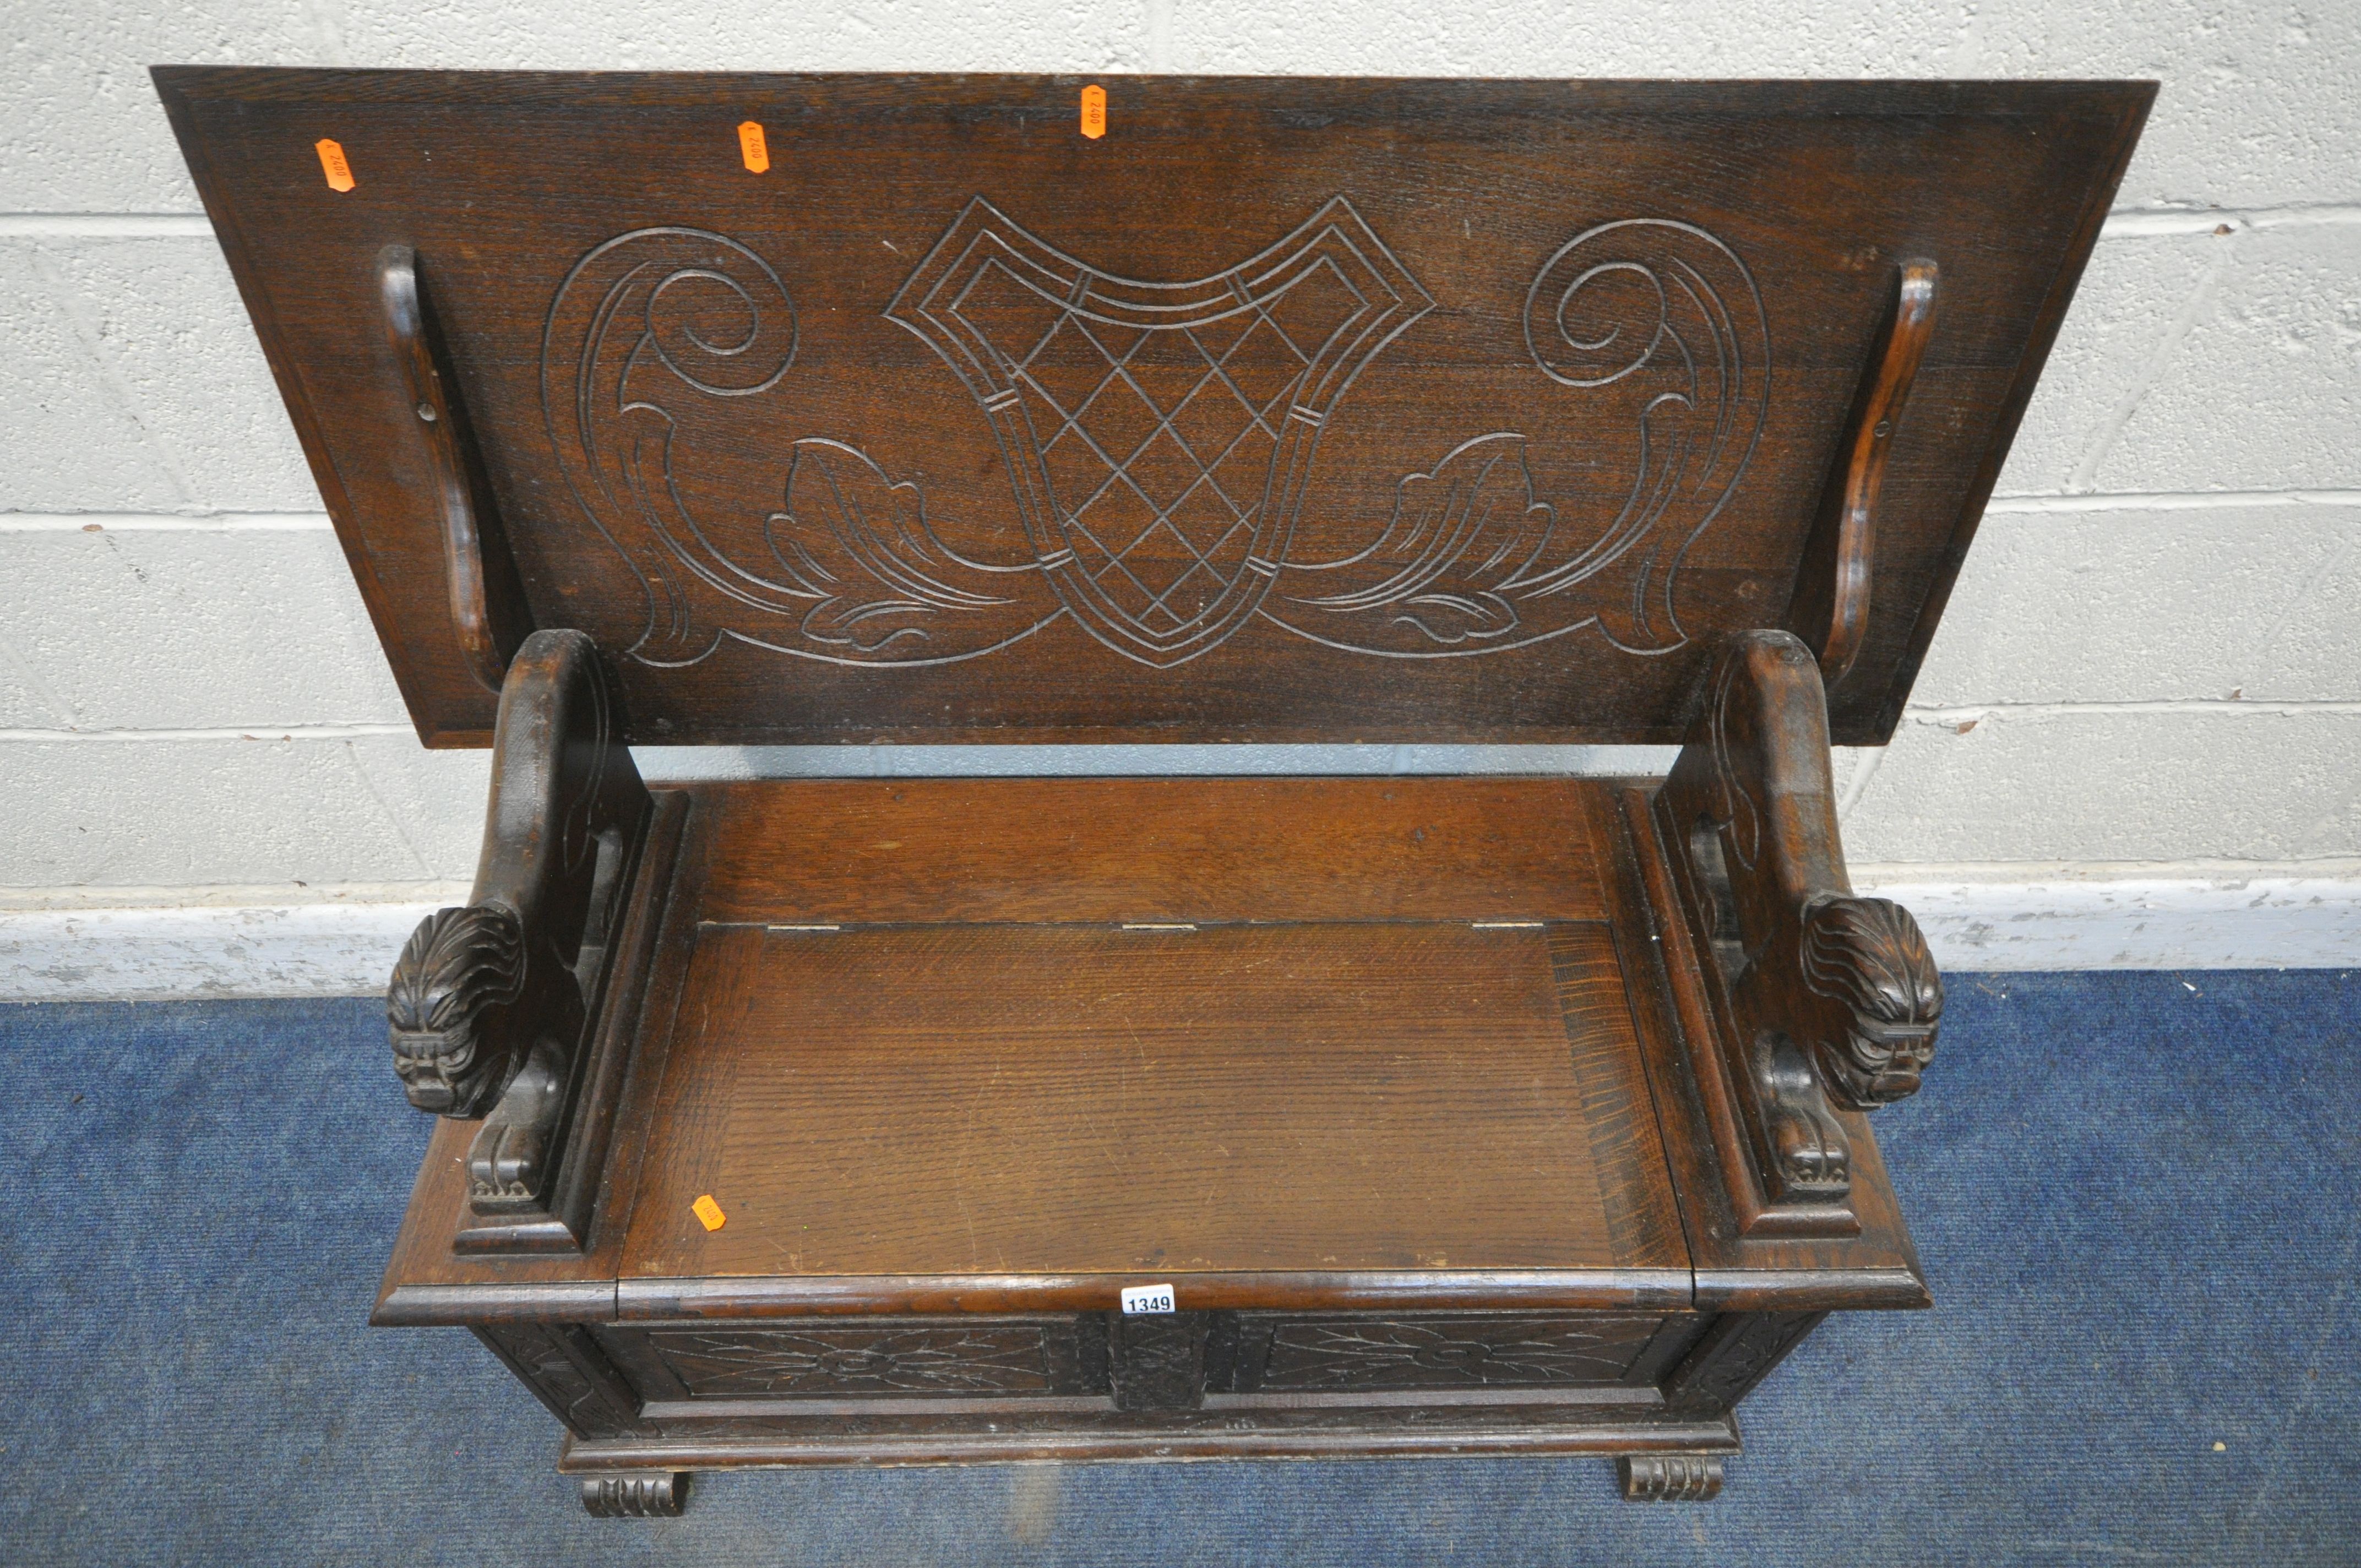 AN EARLY 20TH CENTURY OAK MONKS BENCH, with a rise and fall backrest / surface, lion armrests and - Image 3 of 4